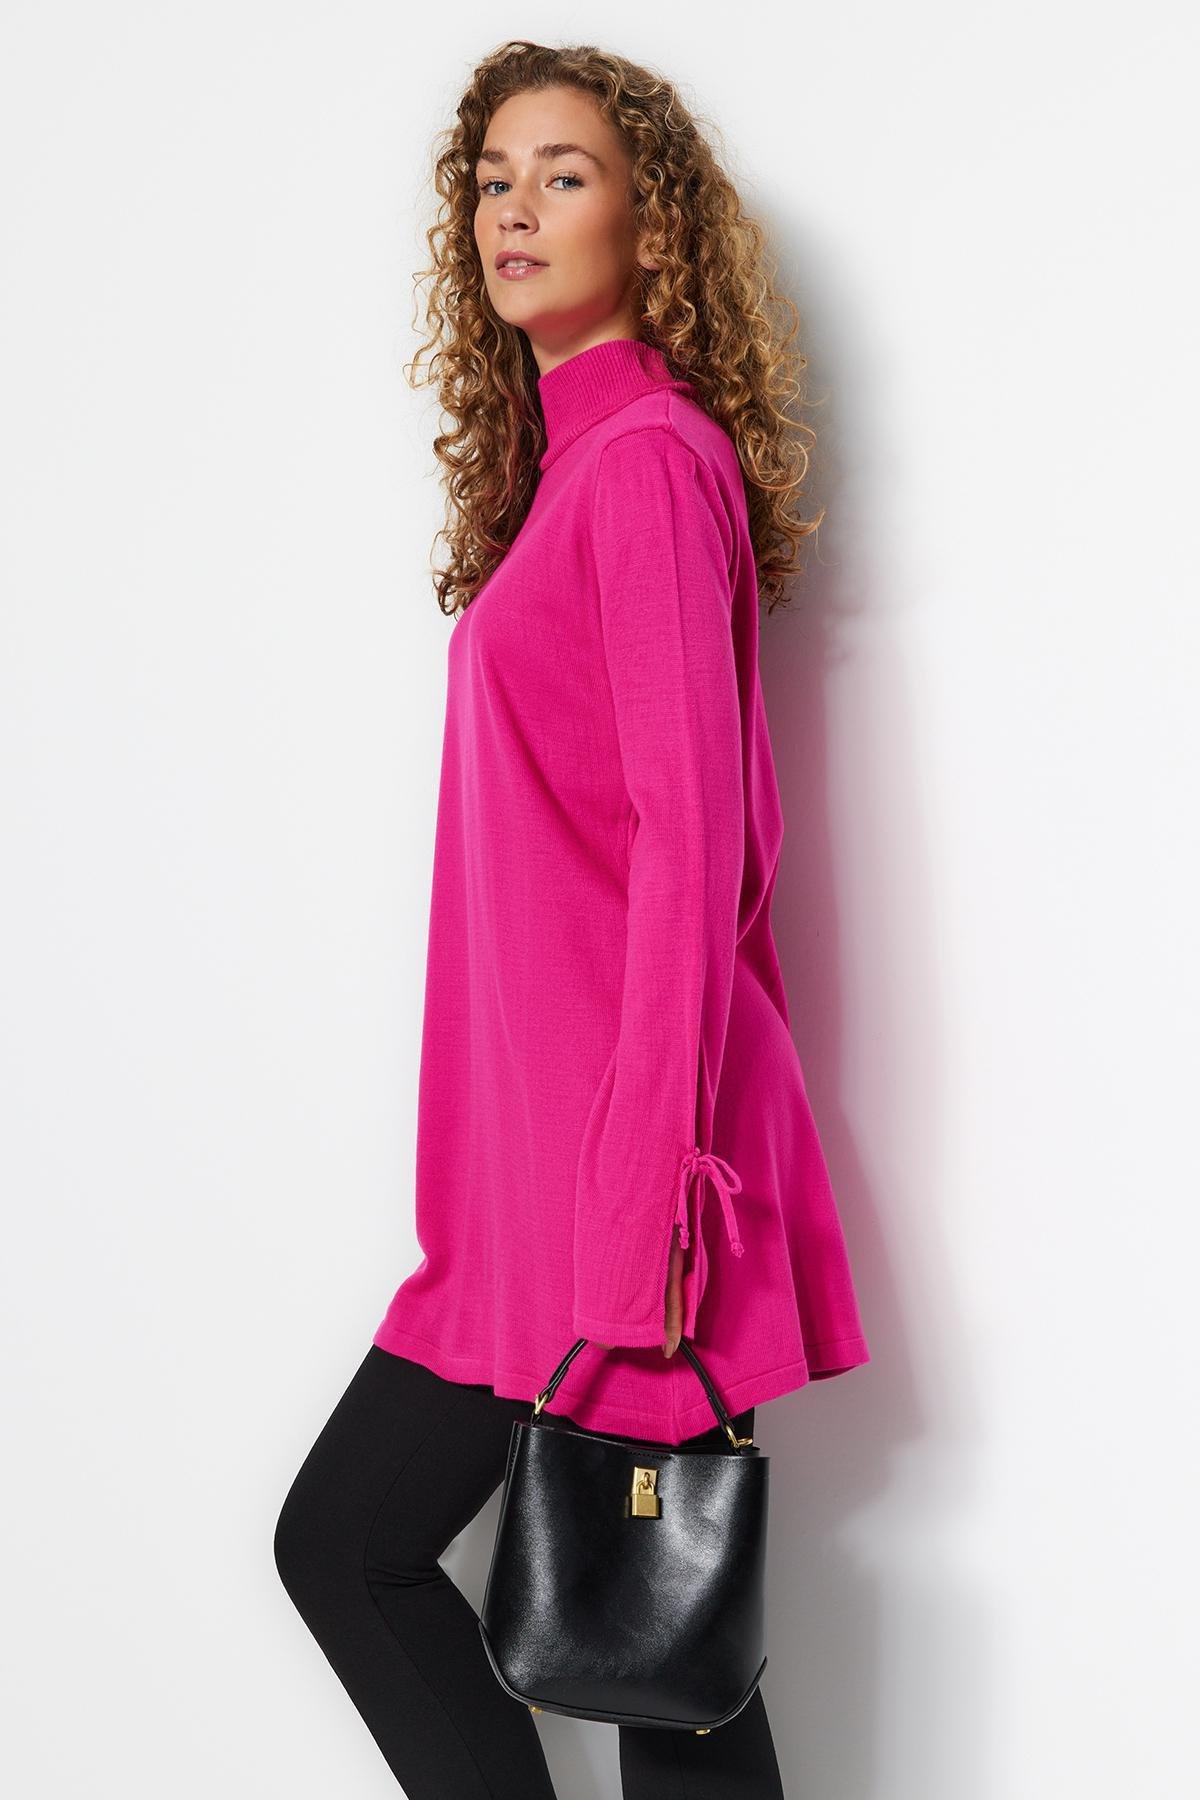 Trendyol - Pink Stand-Up Collar Knitwear Sweater